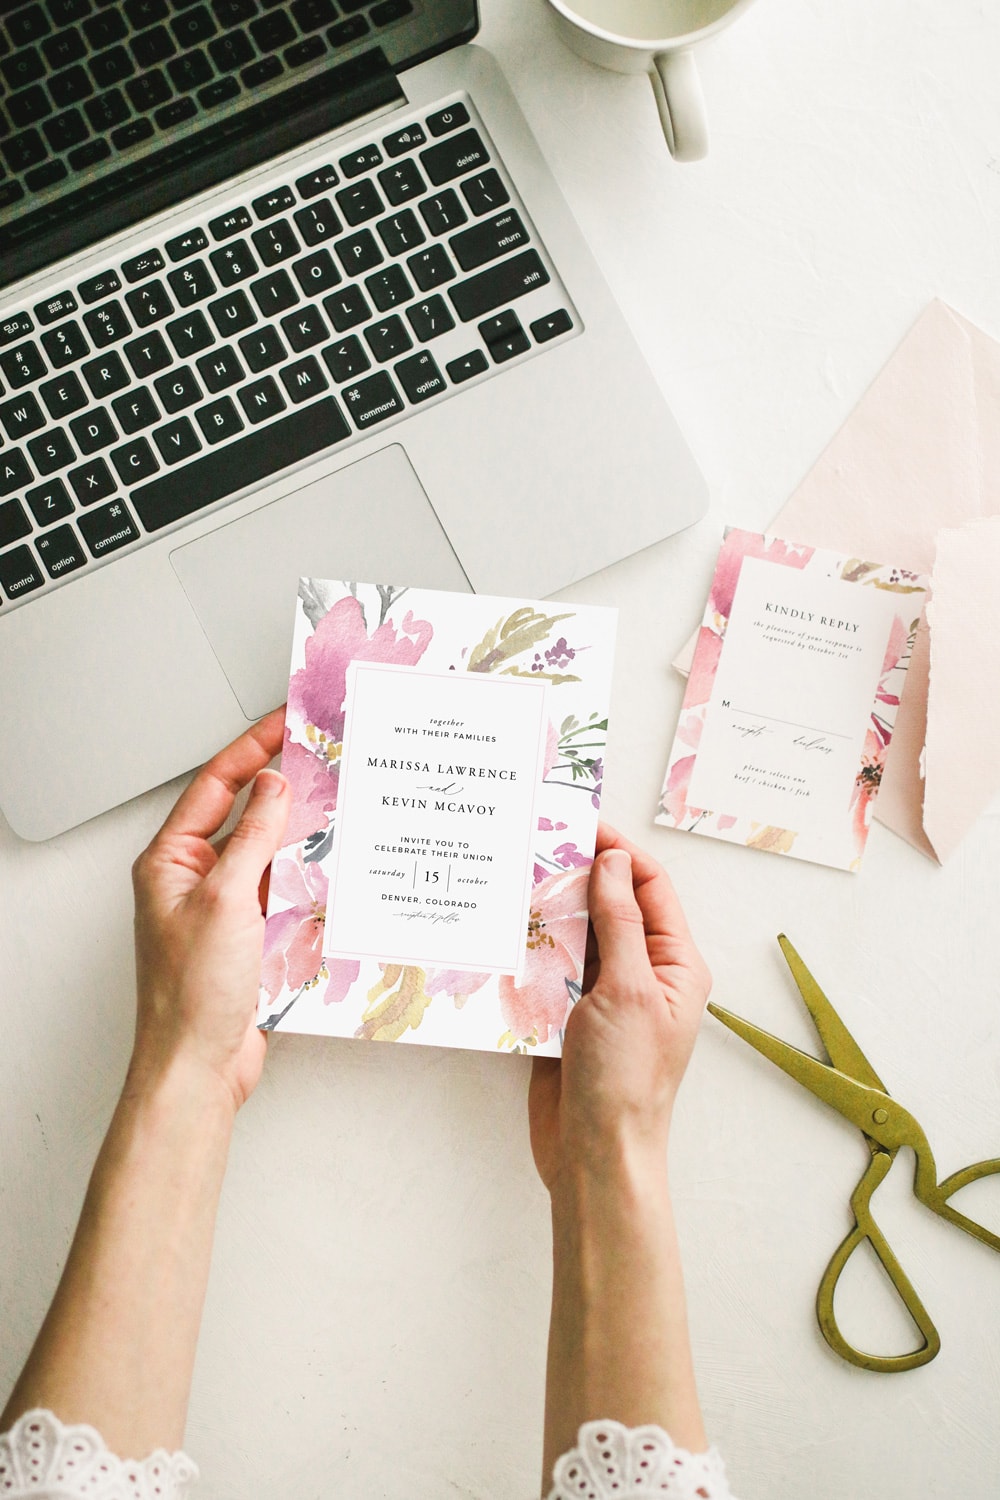 how-to-make-your-own-wedding-invitations-online-free-rodriguez-viey